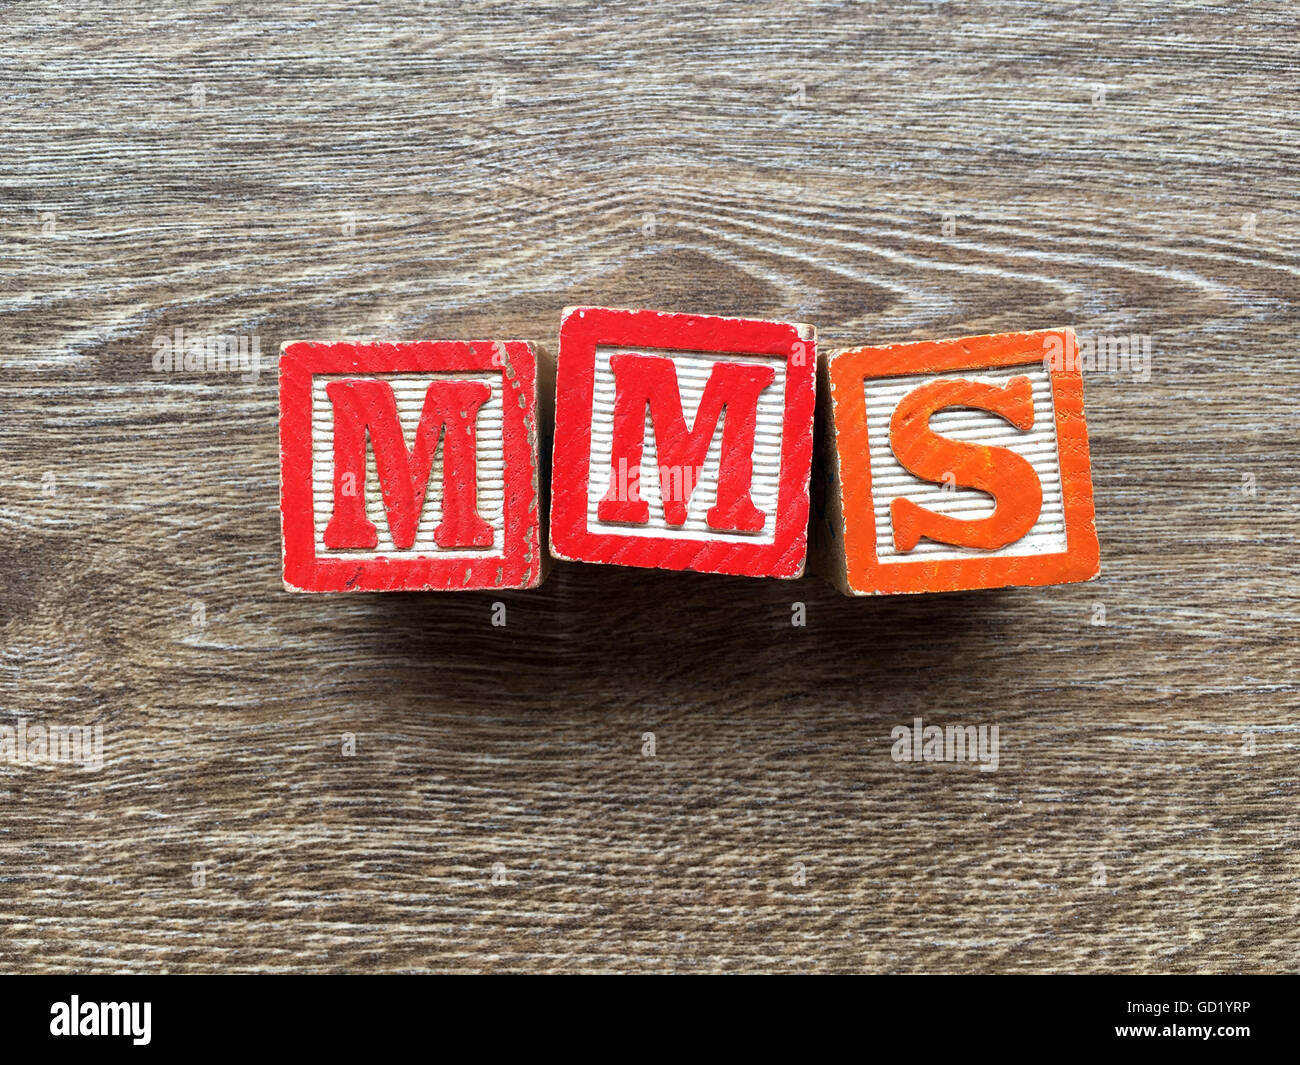 MMS abbreviation written with wood block letter toys Stock Photo